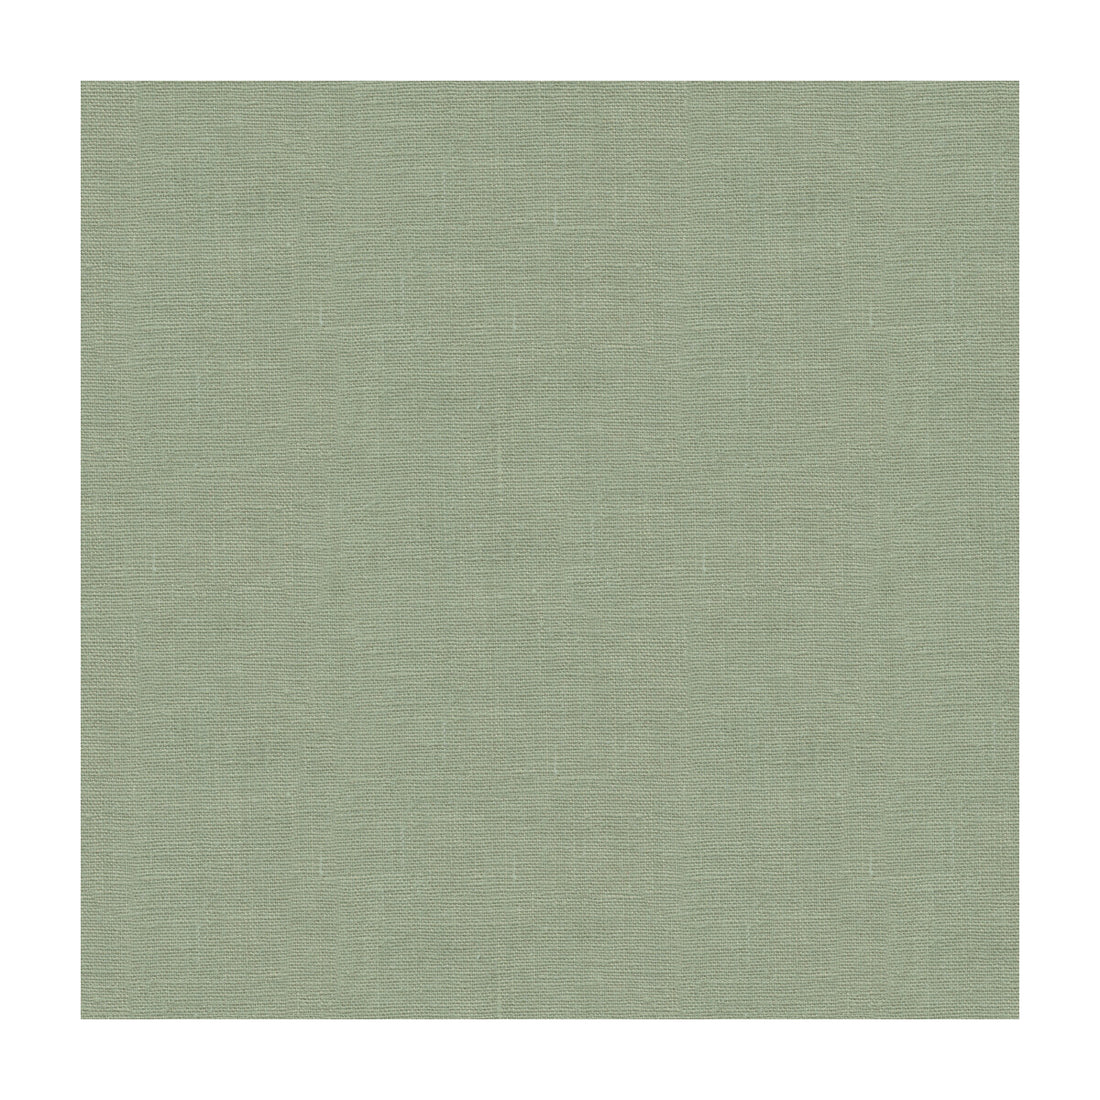 Dublin Linen fabric in leaf color - pattern 2012175.30.0 - by Lee Jofa in the Colour Complements II collection